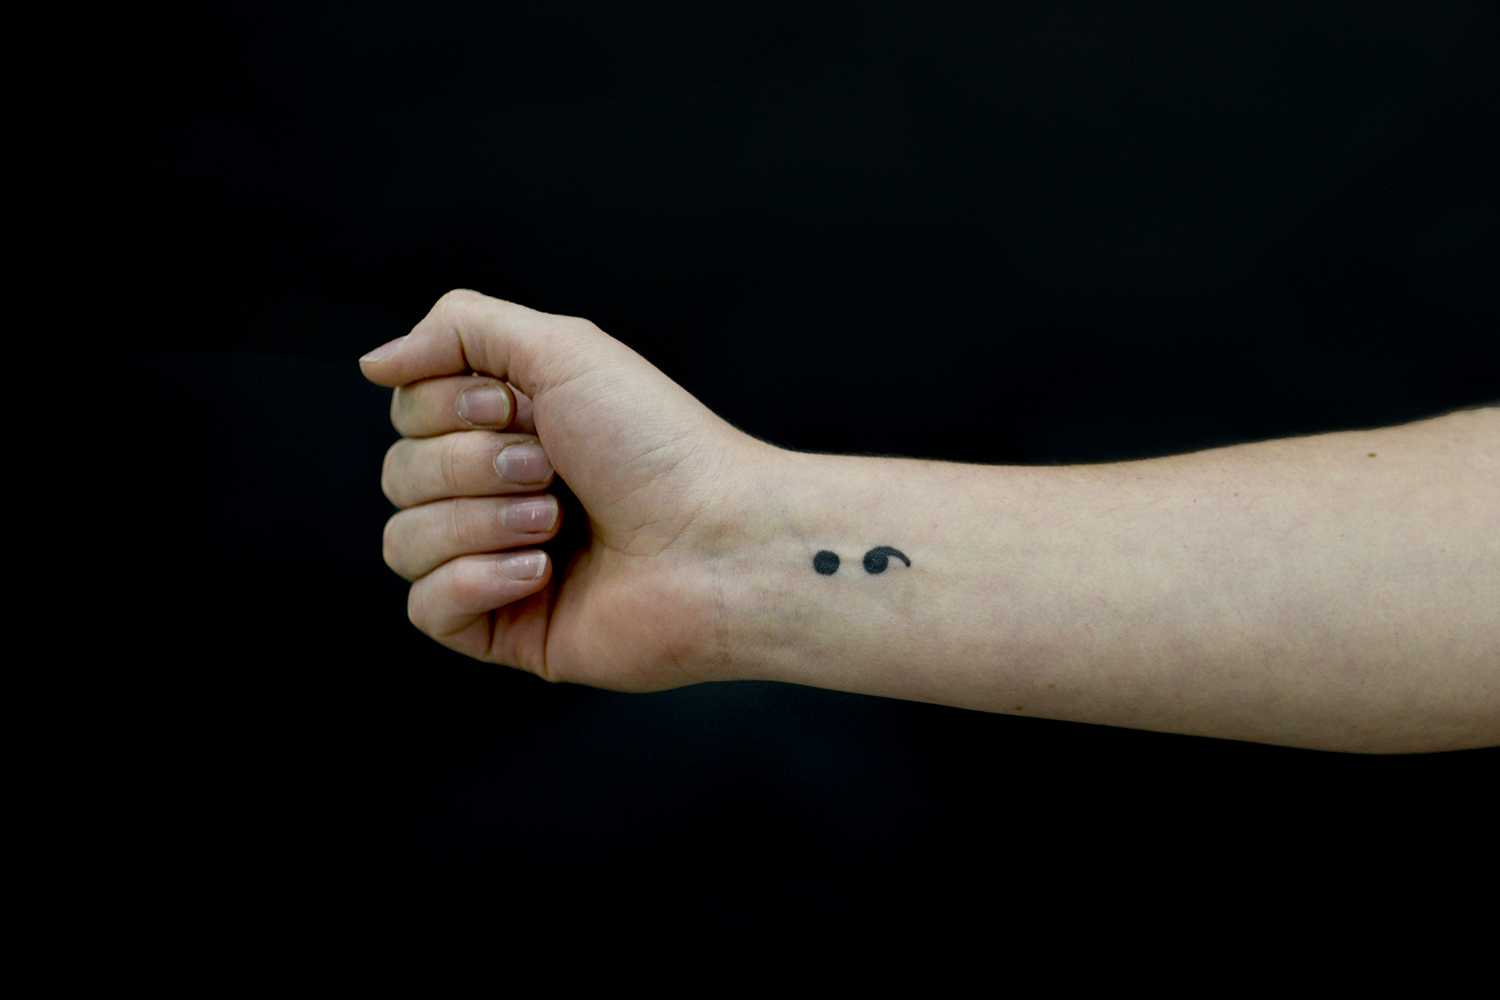 The Semicolon Tattoo – A Creative and Inspirational Sign of Support